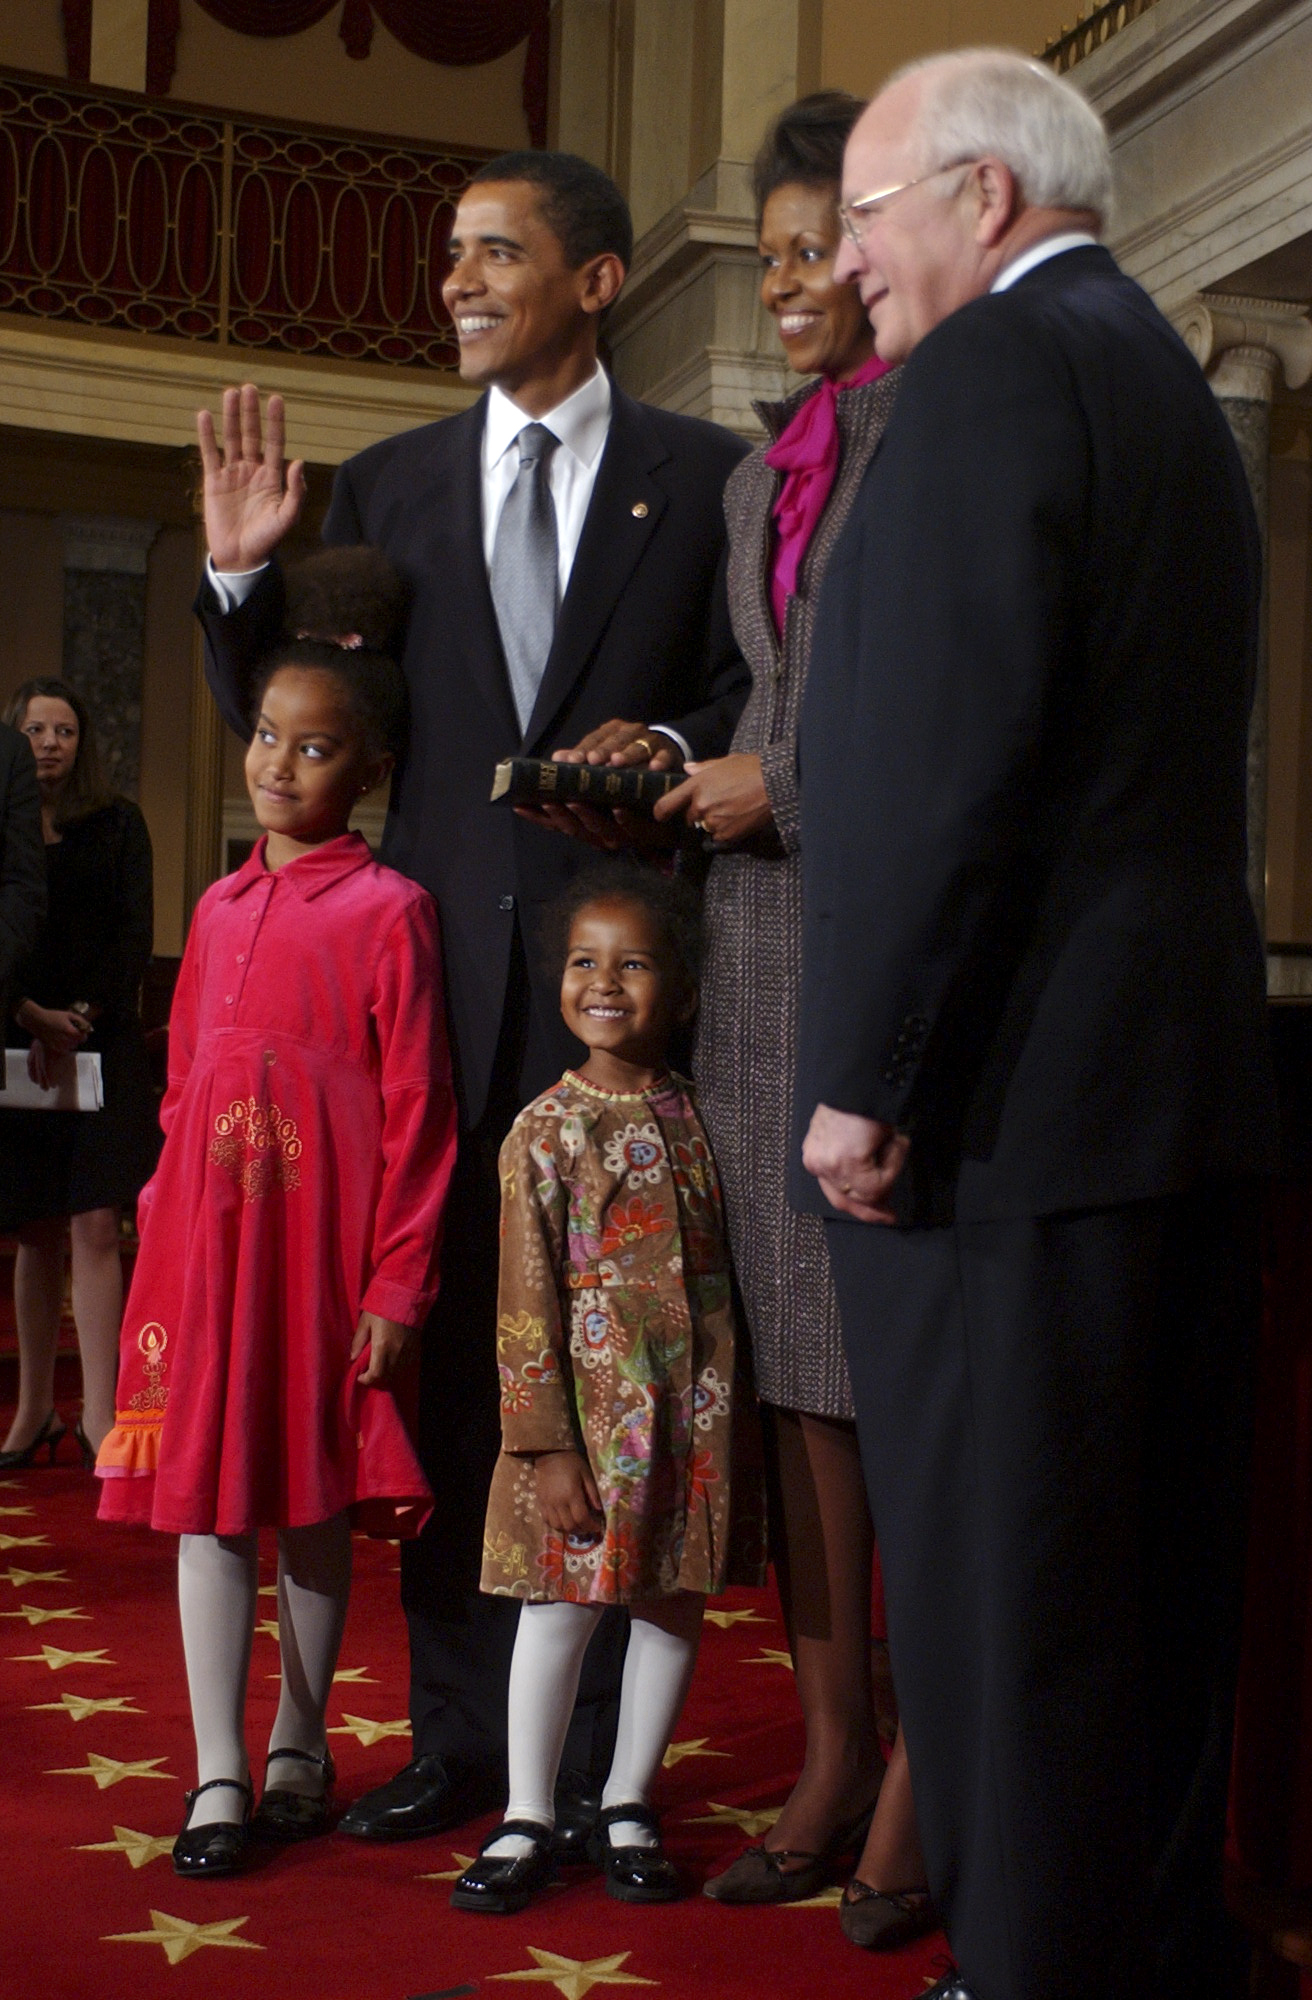 Barack Obama is sworn in as Michelle, Malia, and Sasha Obama and Dick Cheney look, in the US, on January 4, 2005. | Source: Getty Images